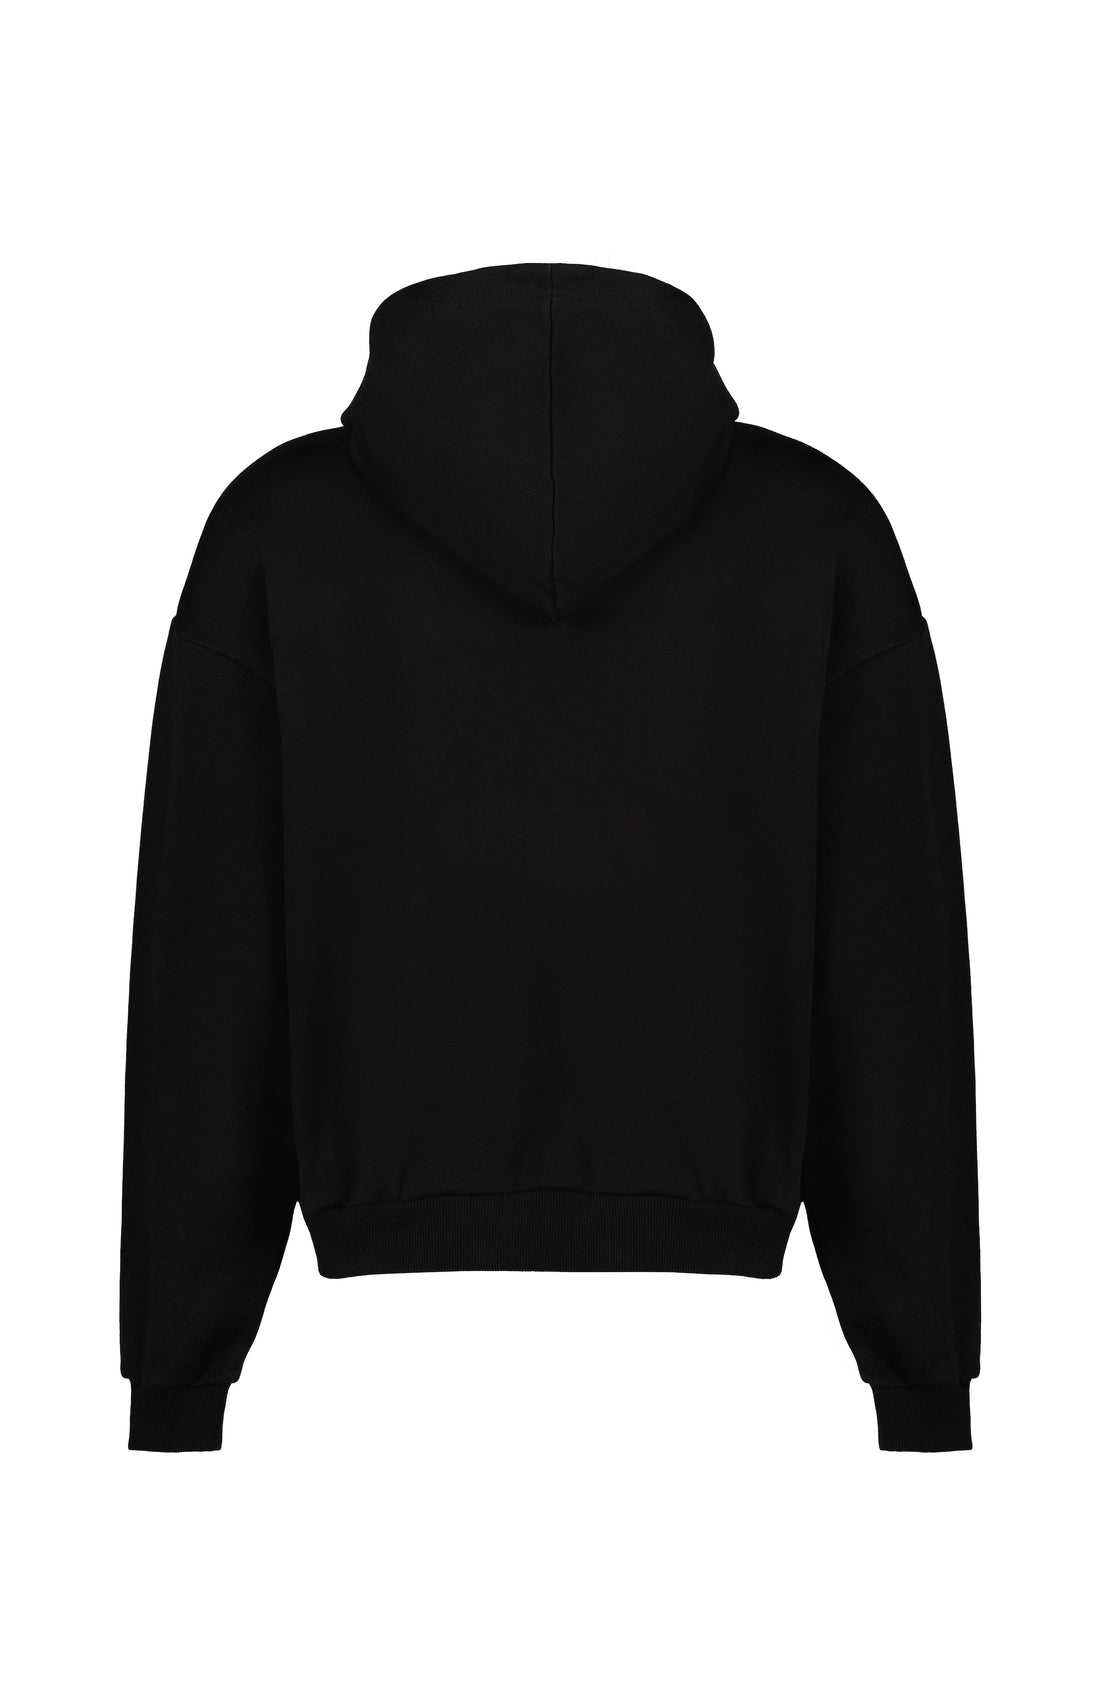 Stay cozy and stylish with our Premium Hoodie. Made from heavy-weight, soft, and comfortable 100% luxury-weight 450GSM fabric, expertly crafted in Portugal with attention to detail. Machine wash cold, hang to dry for best results. Choose your normal size for an oversized fit or size down for a regular fit. A unique and high-end addition to your wardrobe.